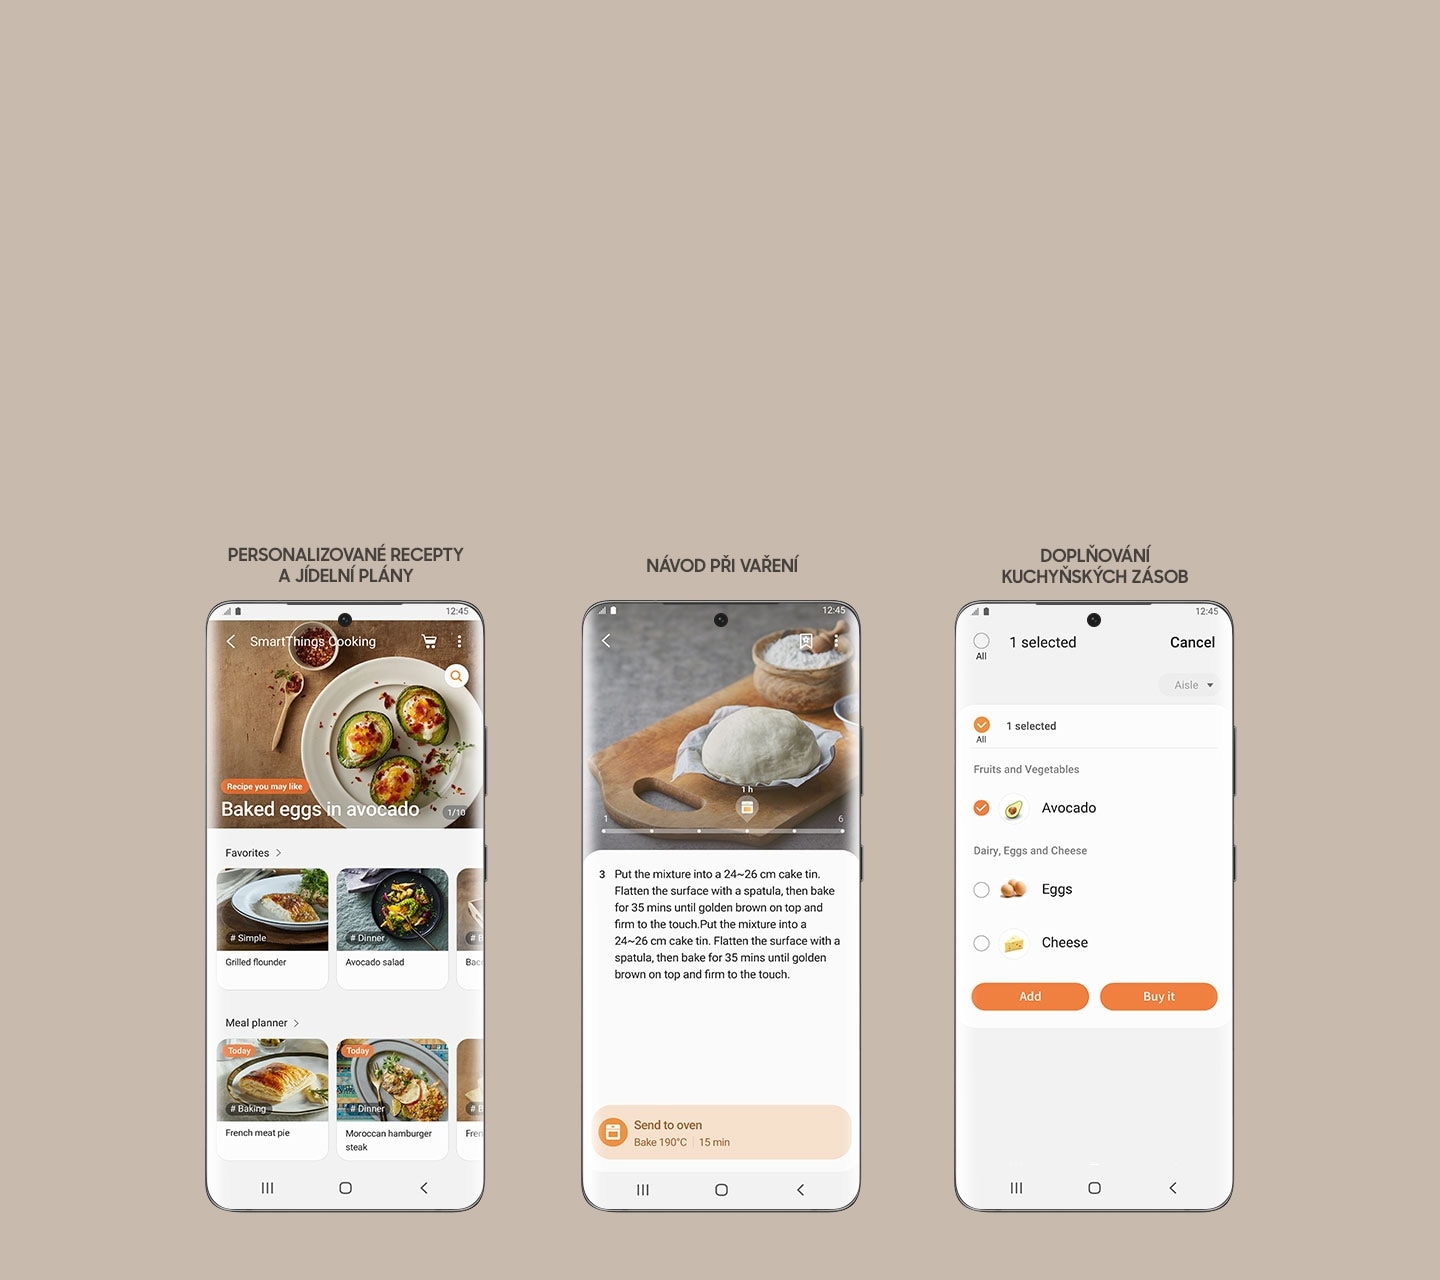 Shows 3 smartphone screens from the SmartThings Cooking app, which lets you access personalized recipes and meal plans, view guided cooking instructions and create a grocery shopping list to buy ingredients.